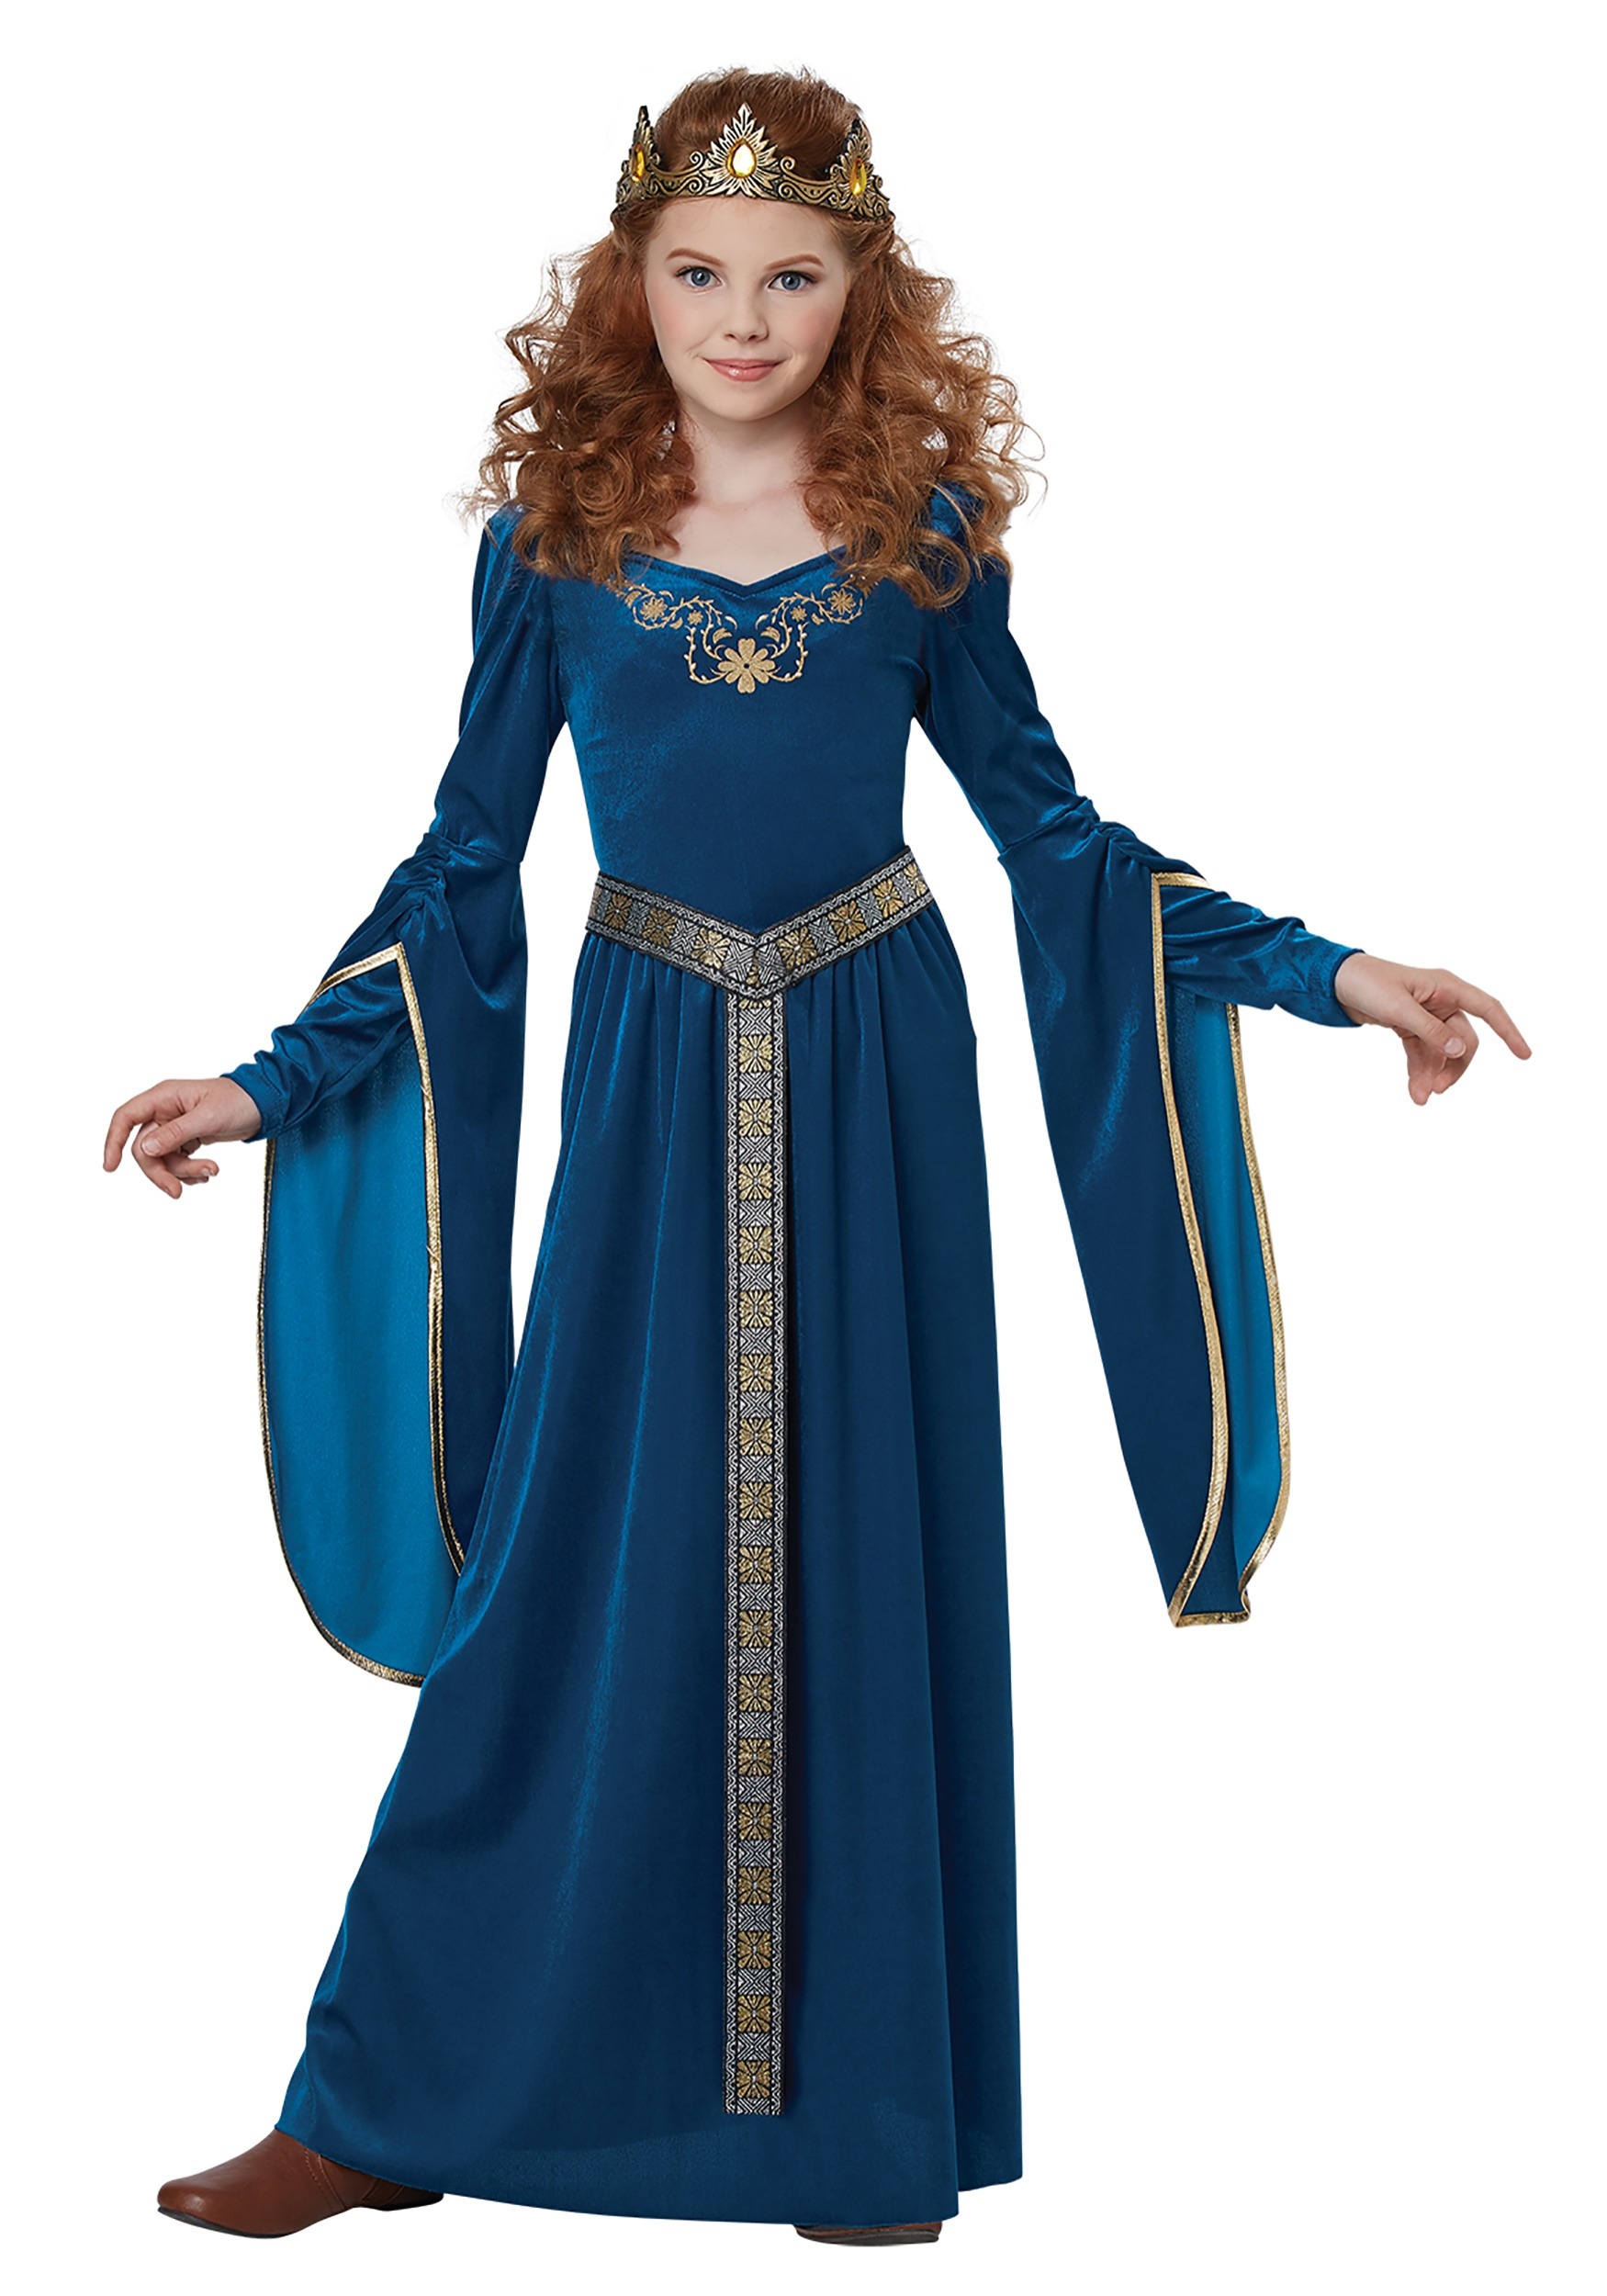 Photos - Fancy Dress California Costume Collection Girls Medieval Princess  Costume 